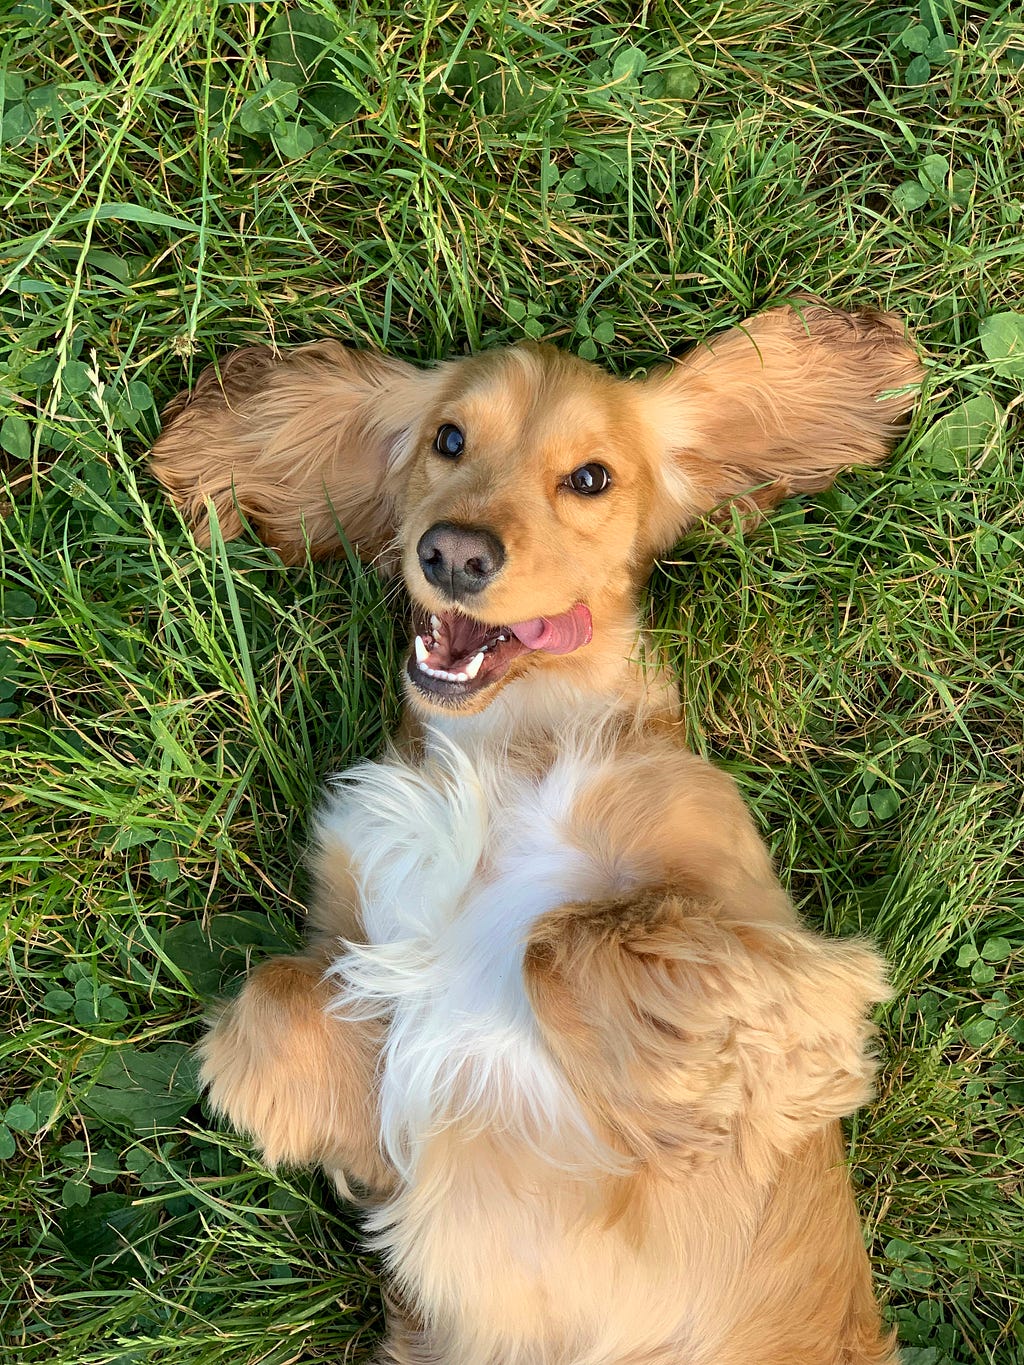 A dachshund lying on its back in the grass